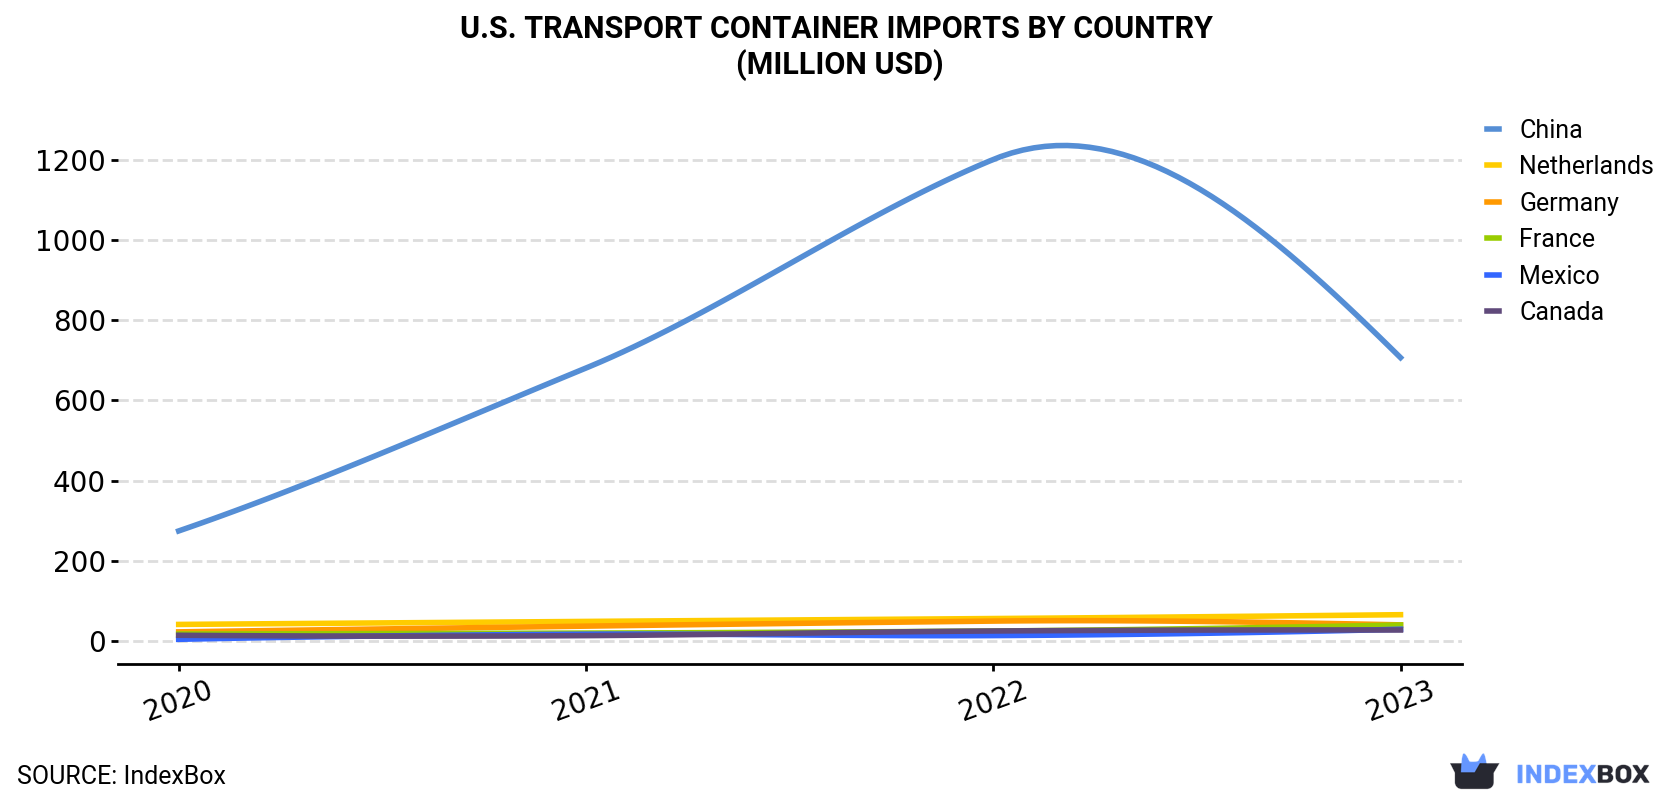 U.S. Transport Container Imports By Country (Million USD)